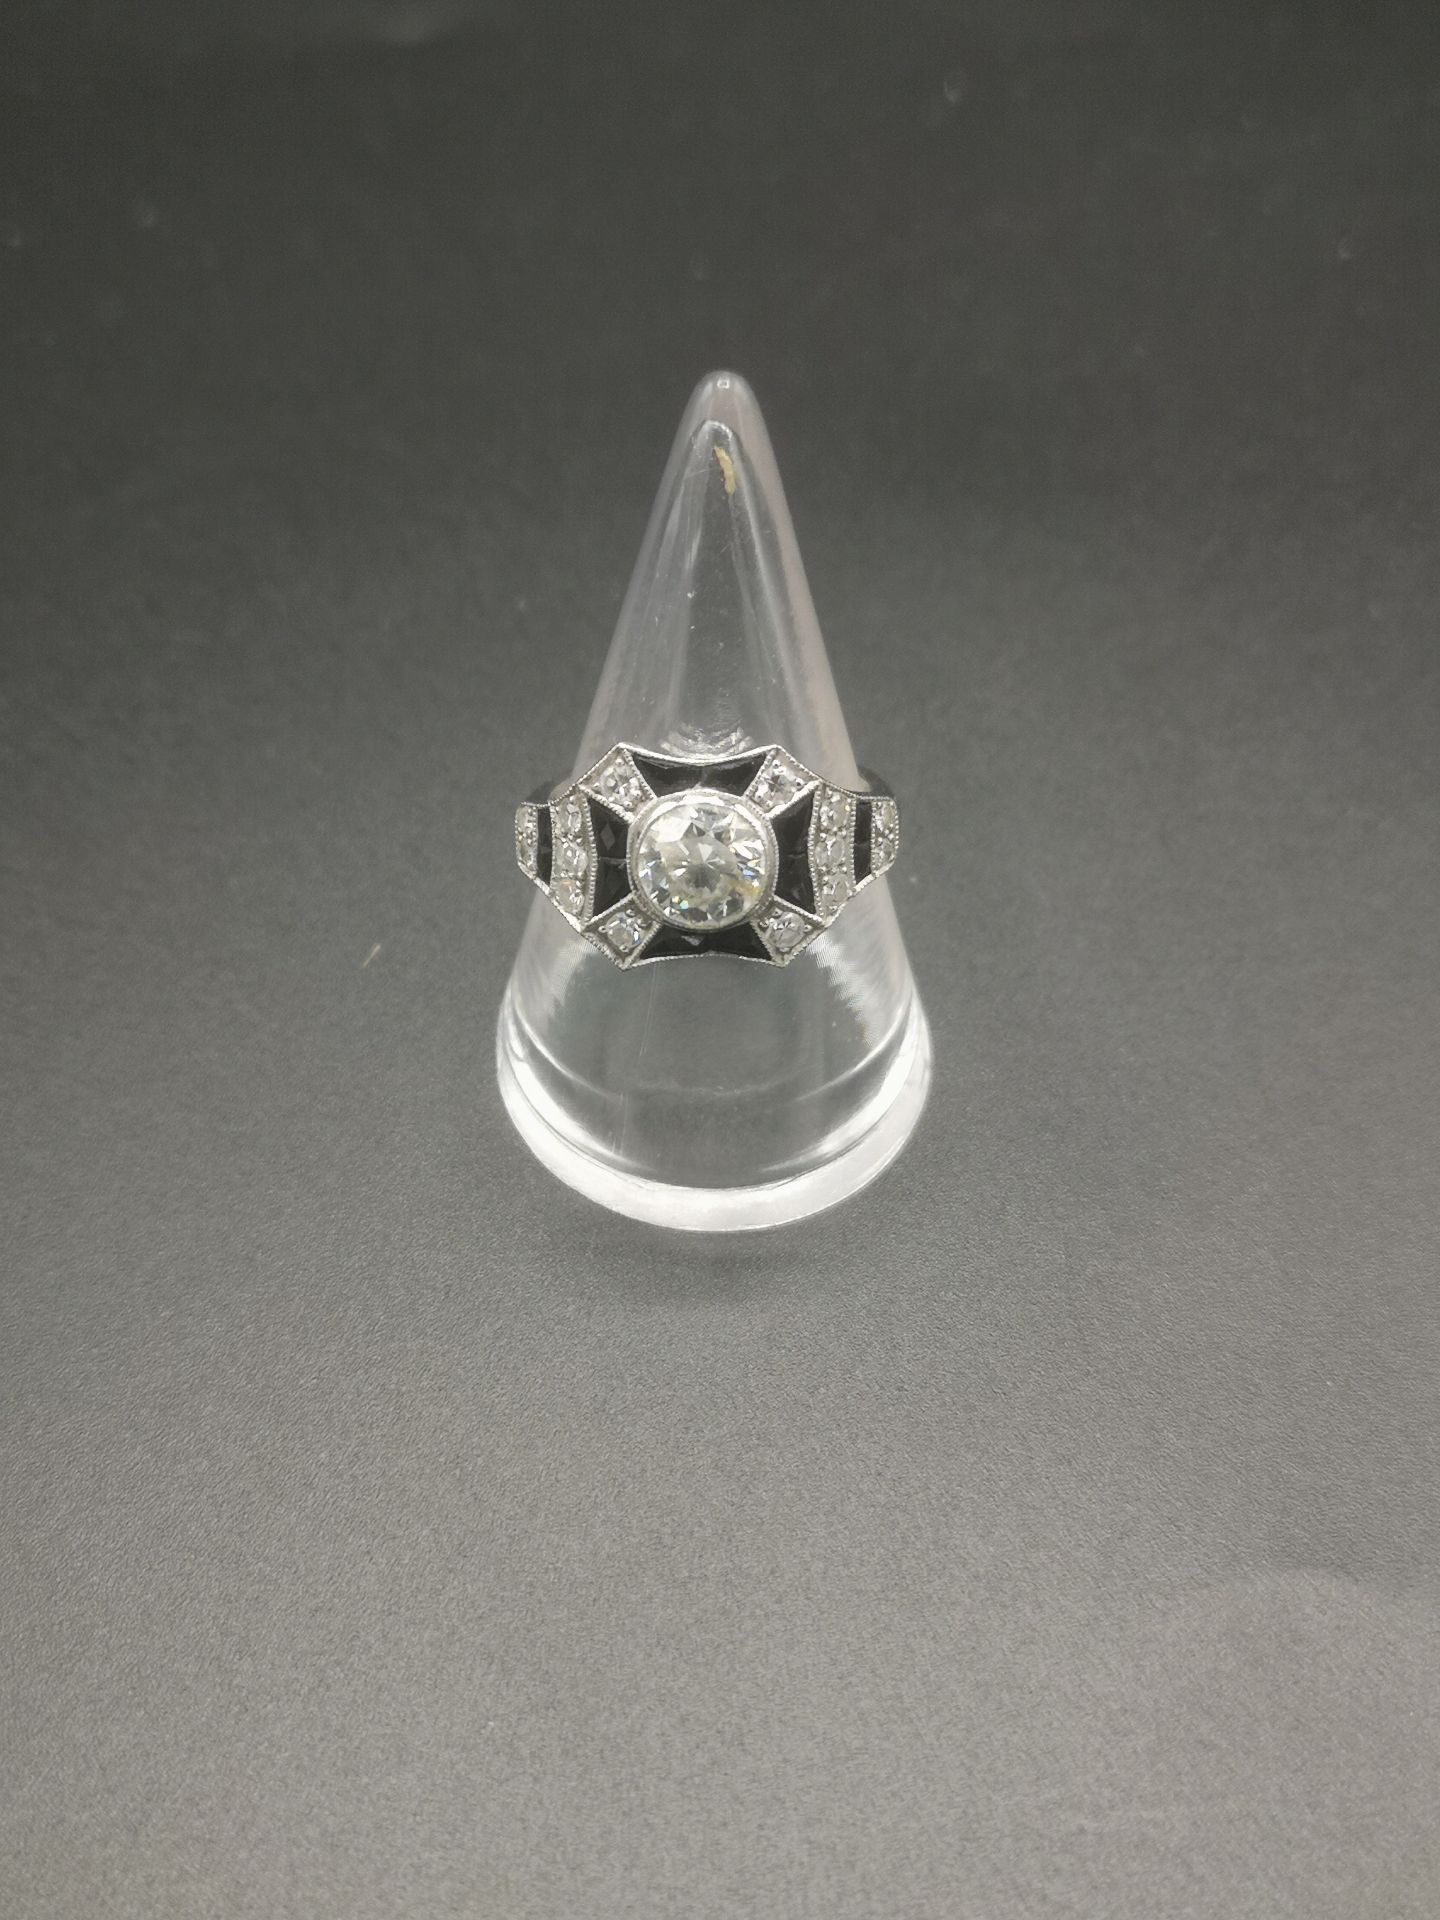 18ct white gold, diamond and black onyx ring - Image 2 of 7